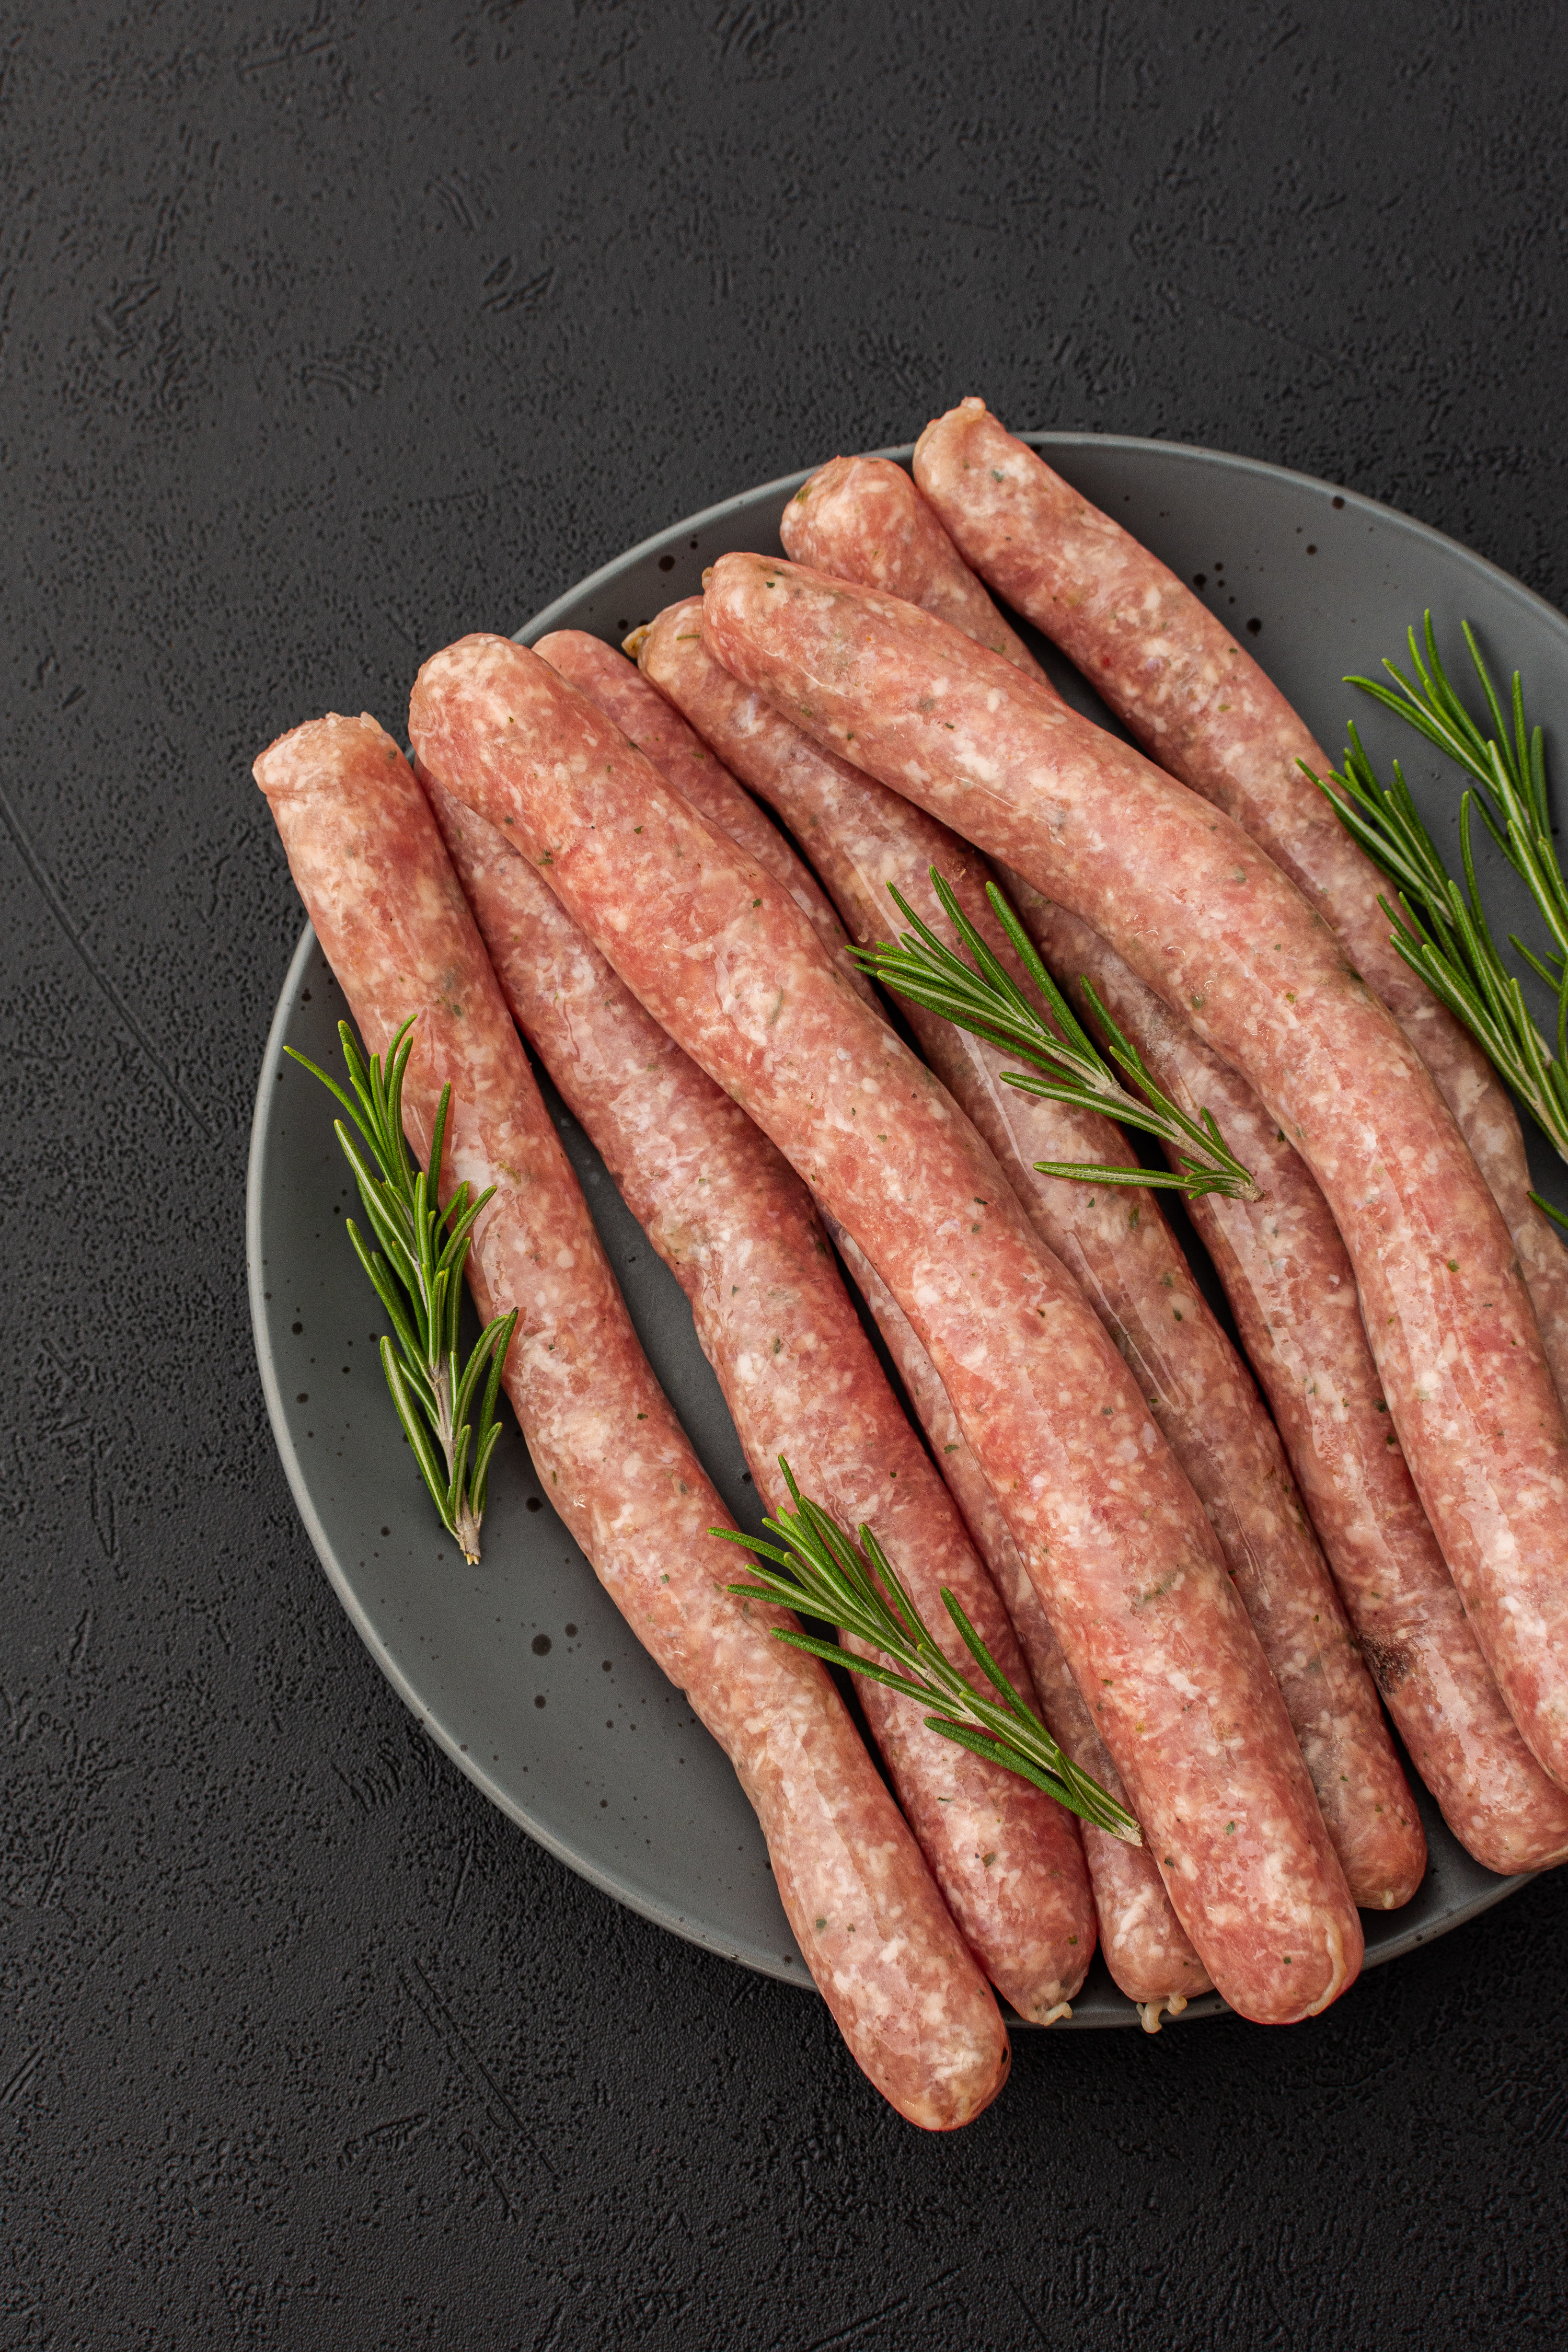 A plate of raw sausage with sprigs of rosemary garnish